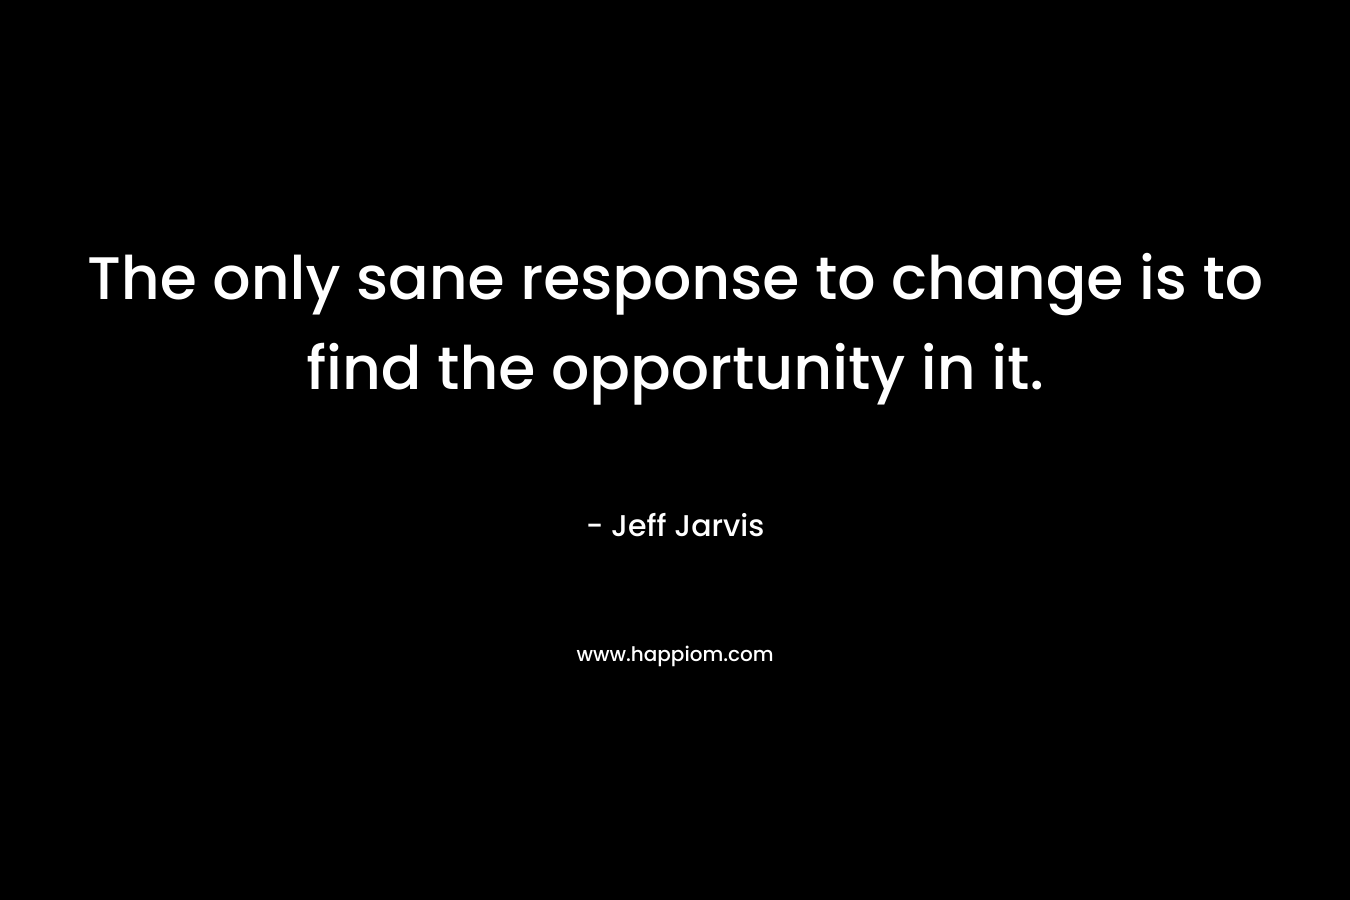 The only sane response to change is to find the opportunity in it. – Jeff Jarvis